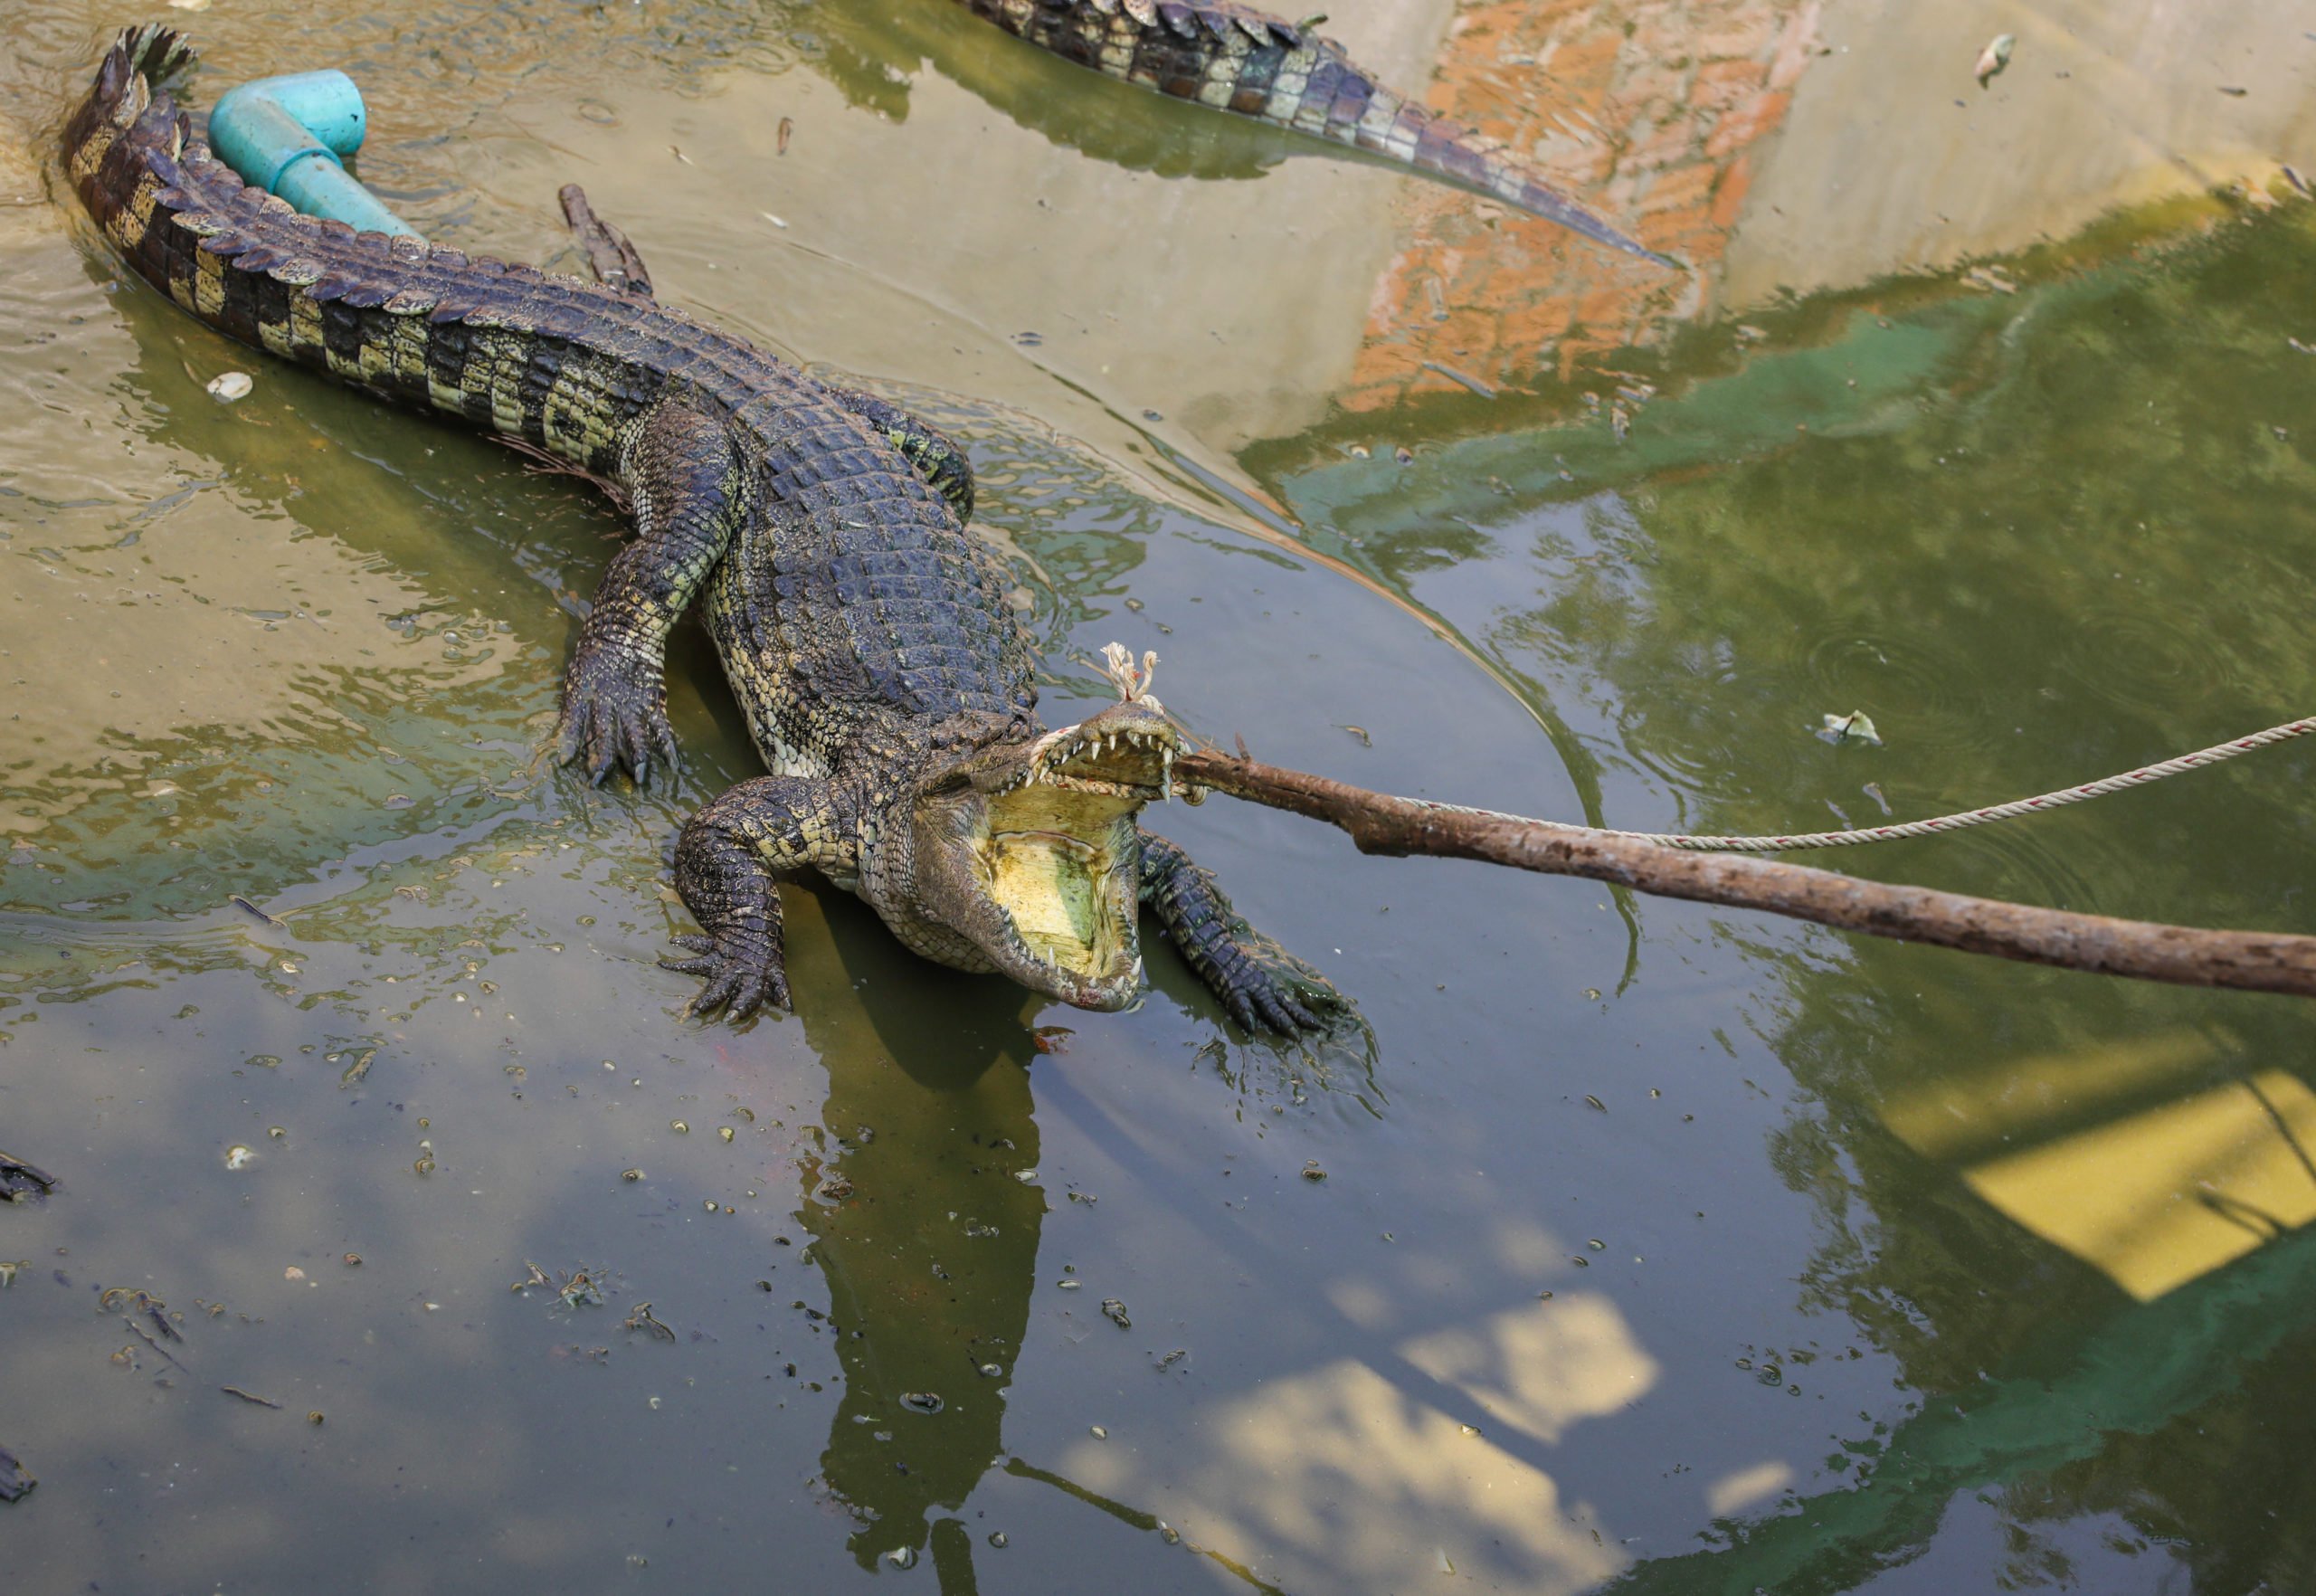 A Siamese crocodile being collected from a pool at a crocodile farm in Siem Reap 